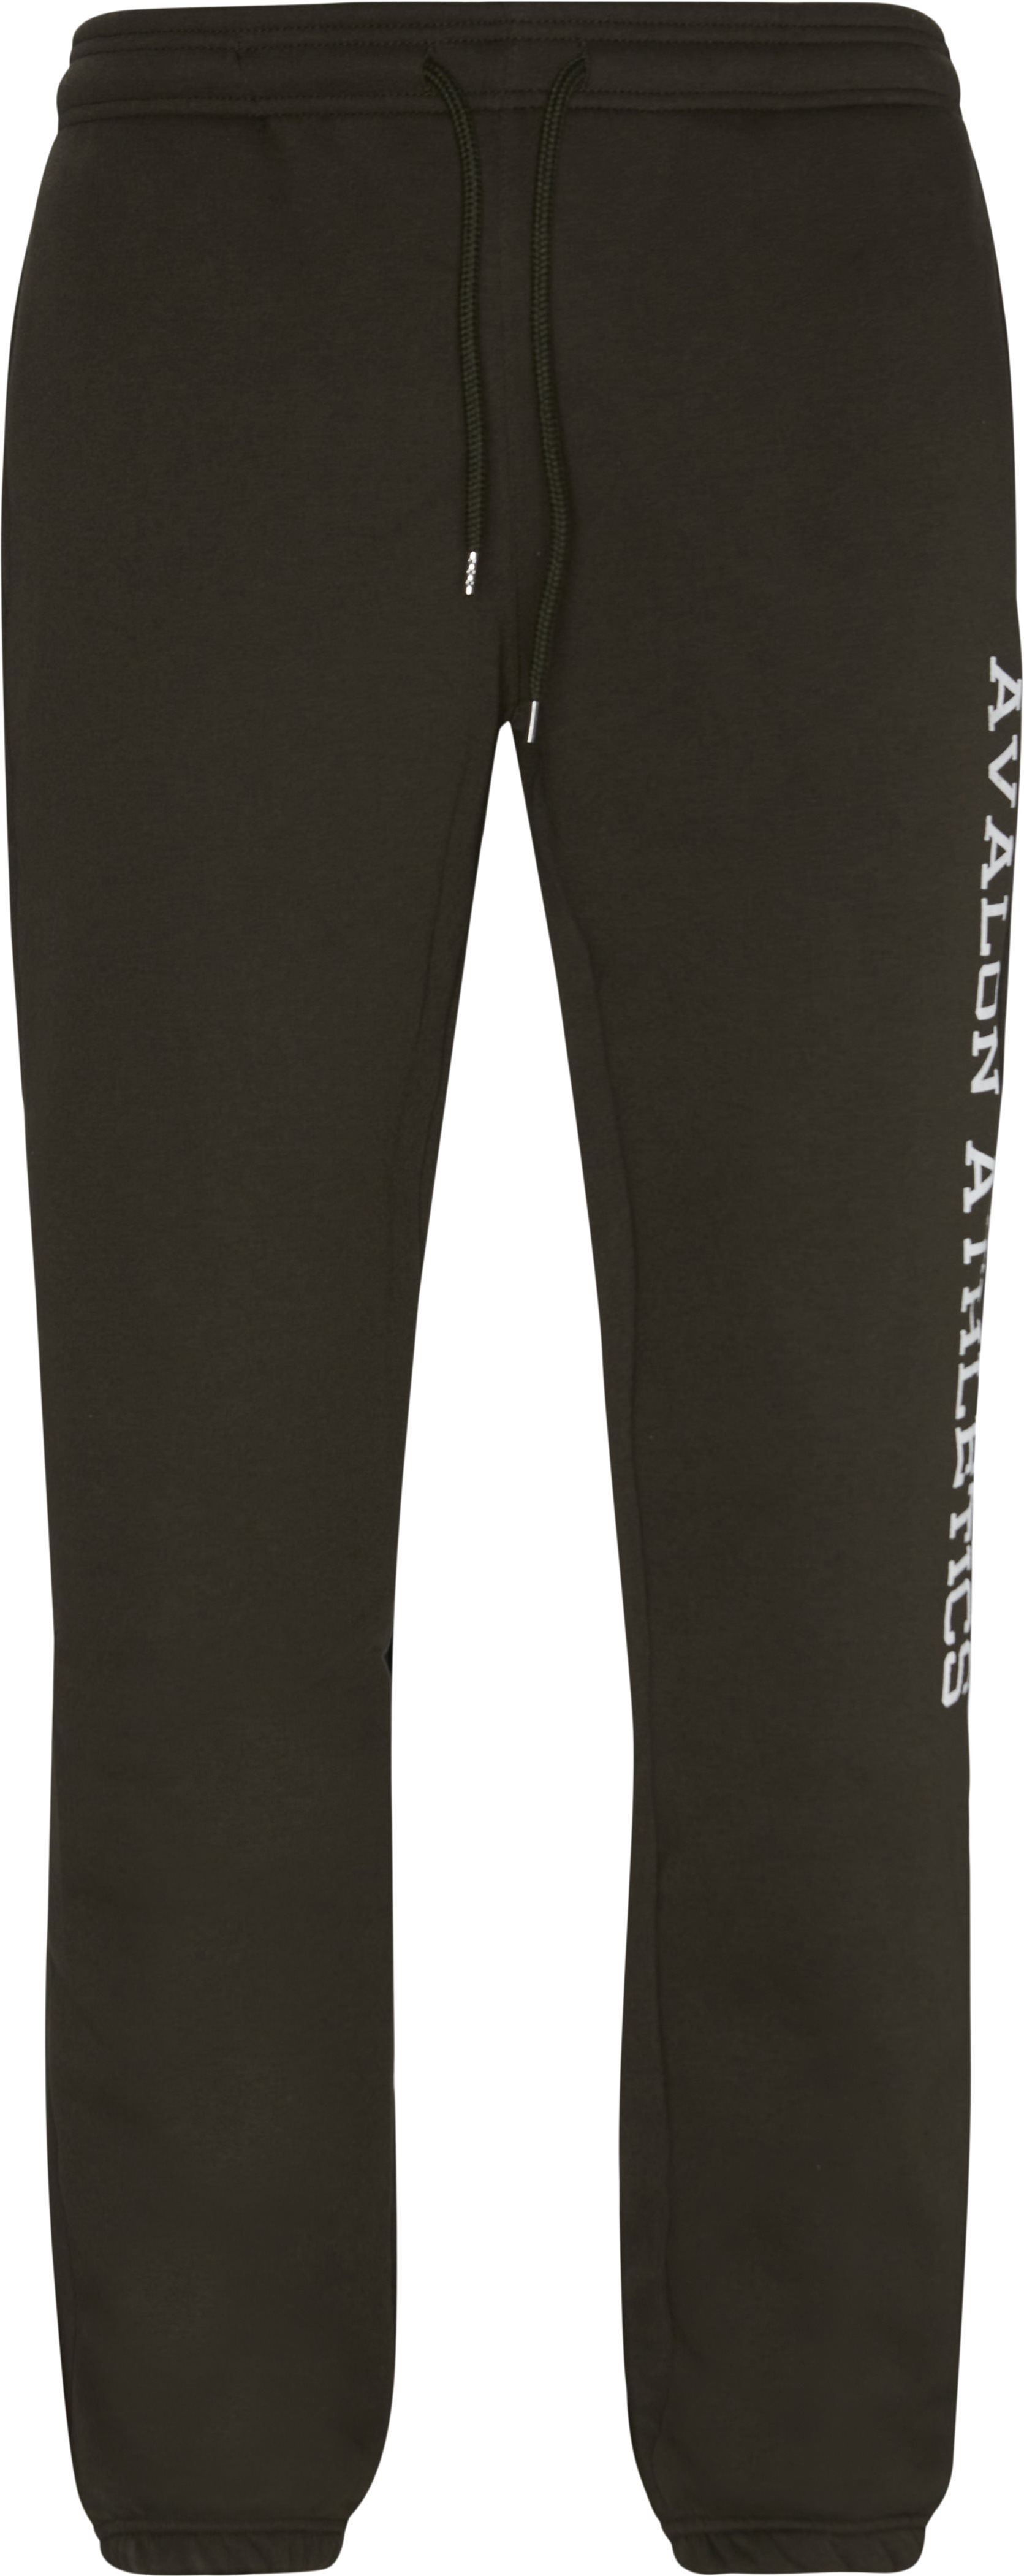 Brickwell Pants - Trousers - Regular fit - Army